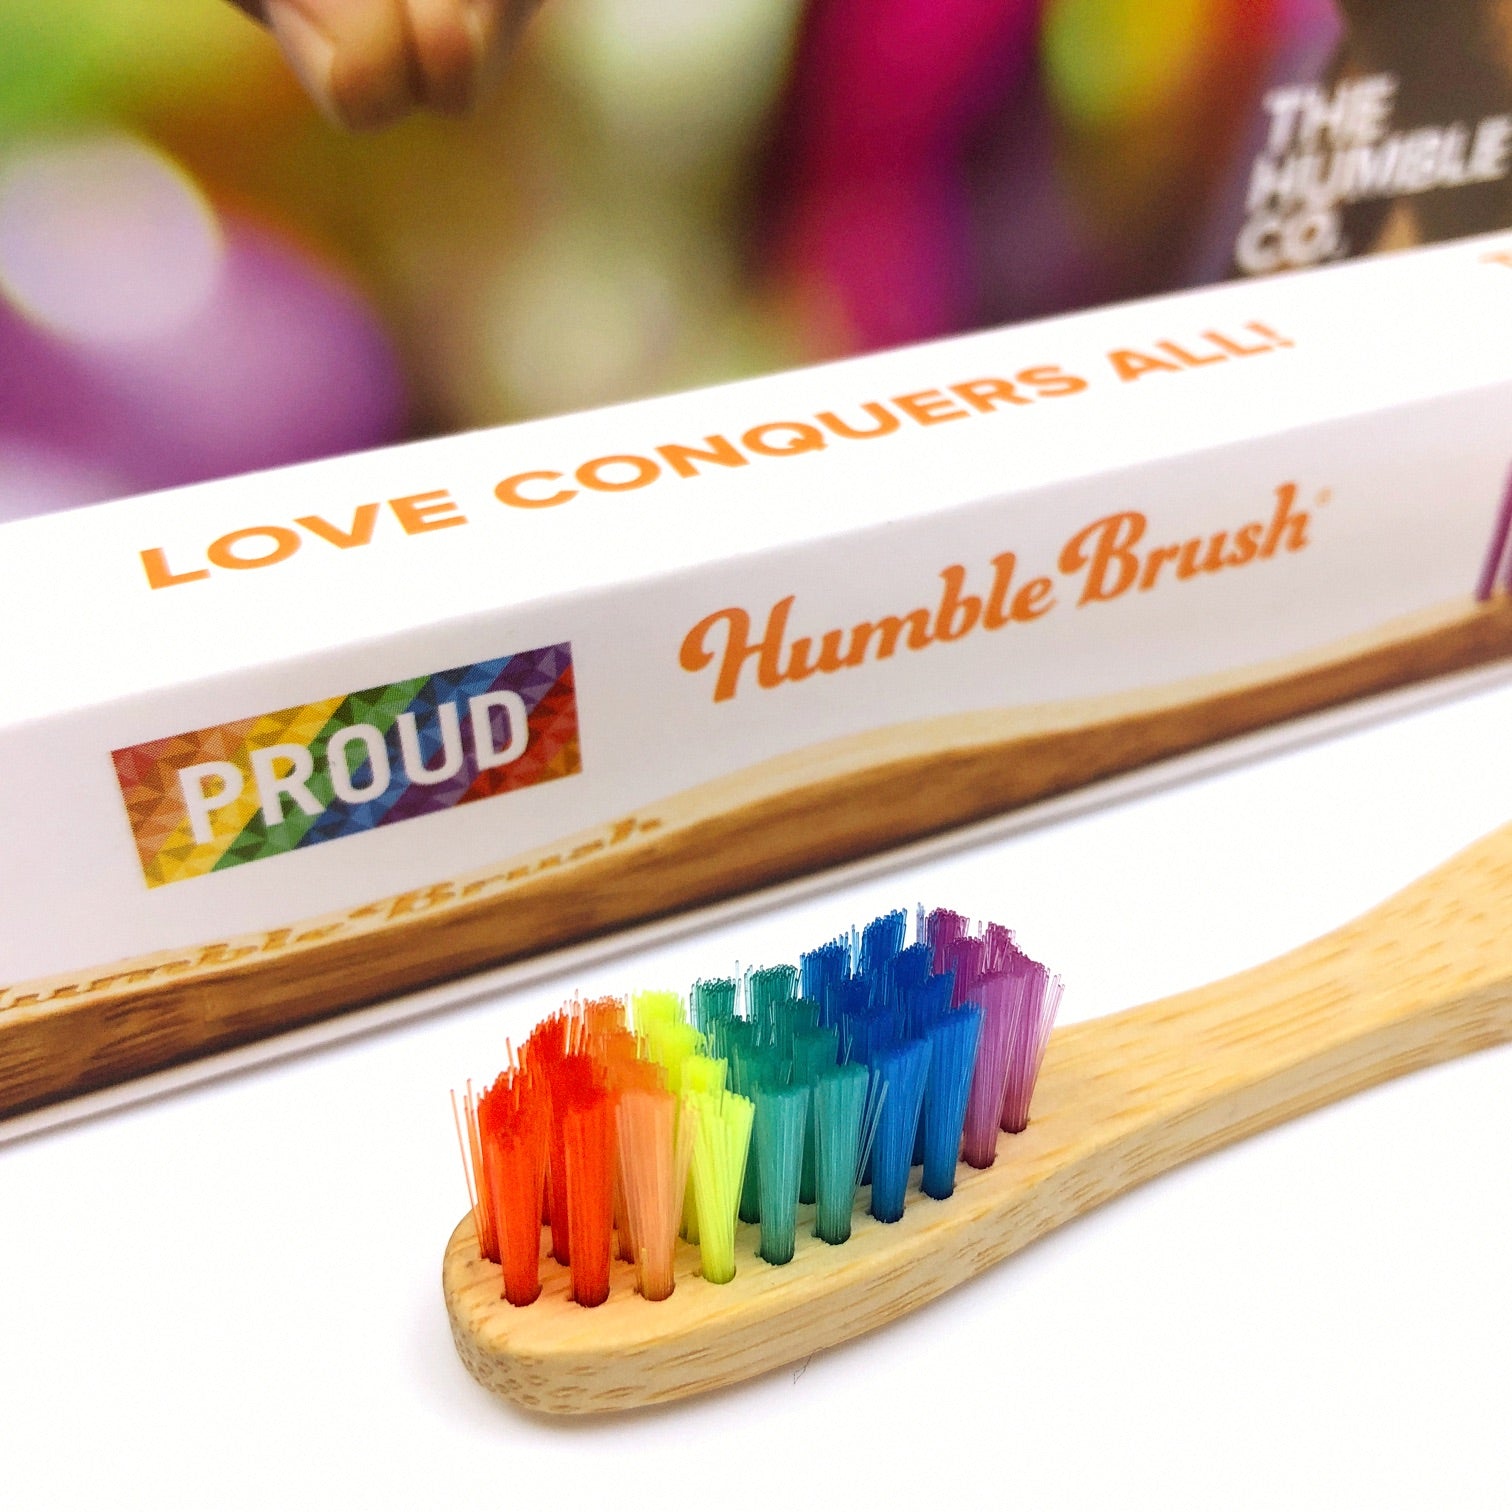 The PROUD Humble Toothbrush 100% Bamboo - Adult